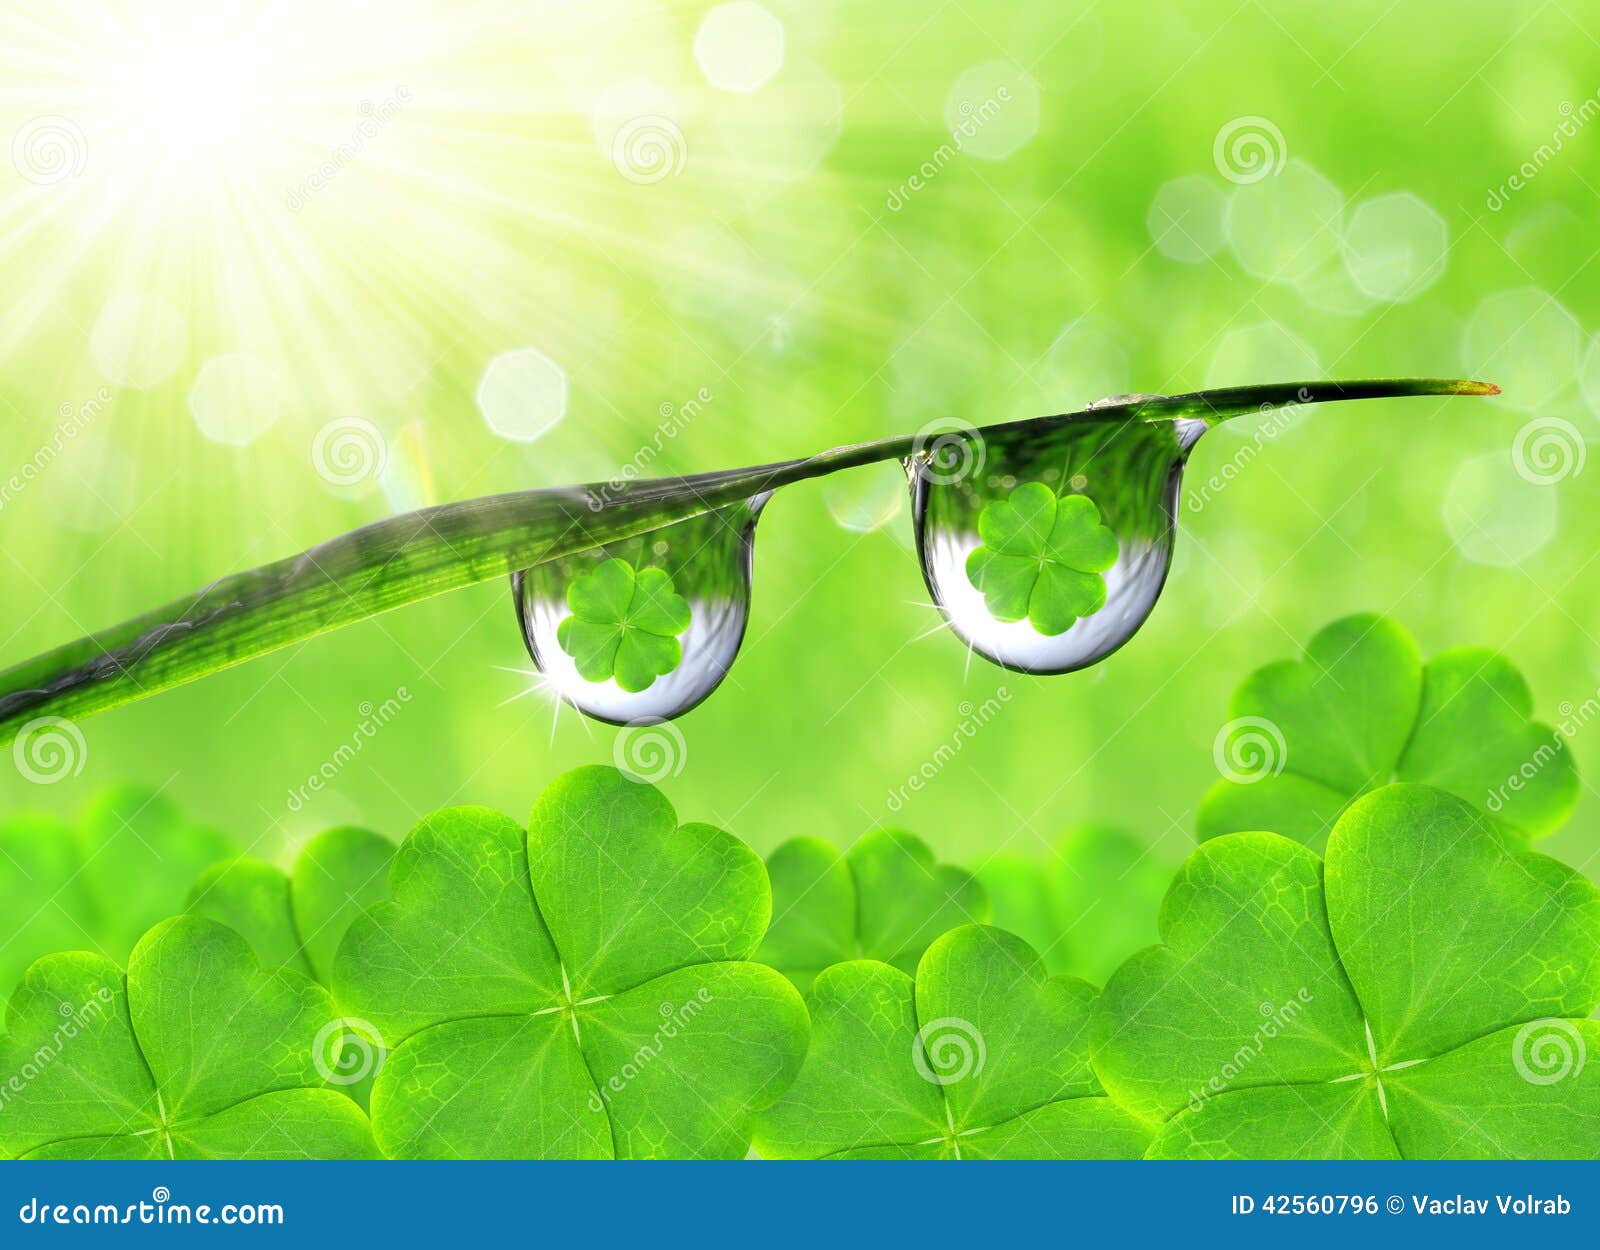 Fresh dewy green grass stock photo. Image of drop, background - 42560796